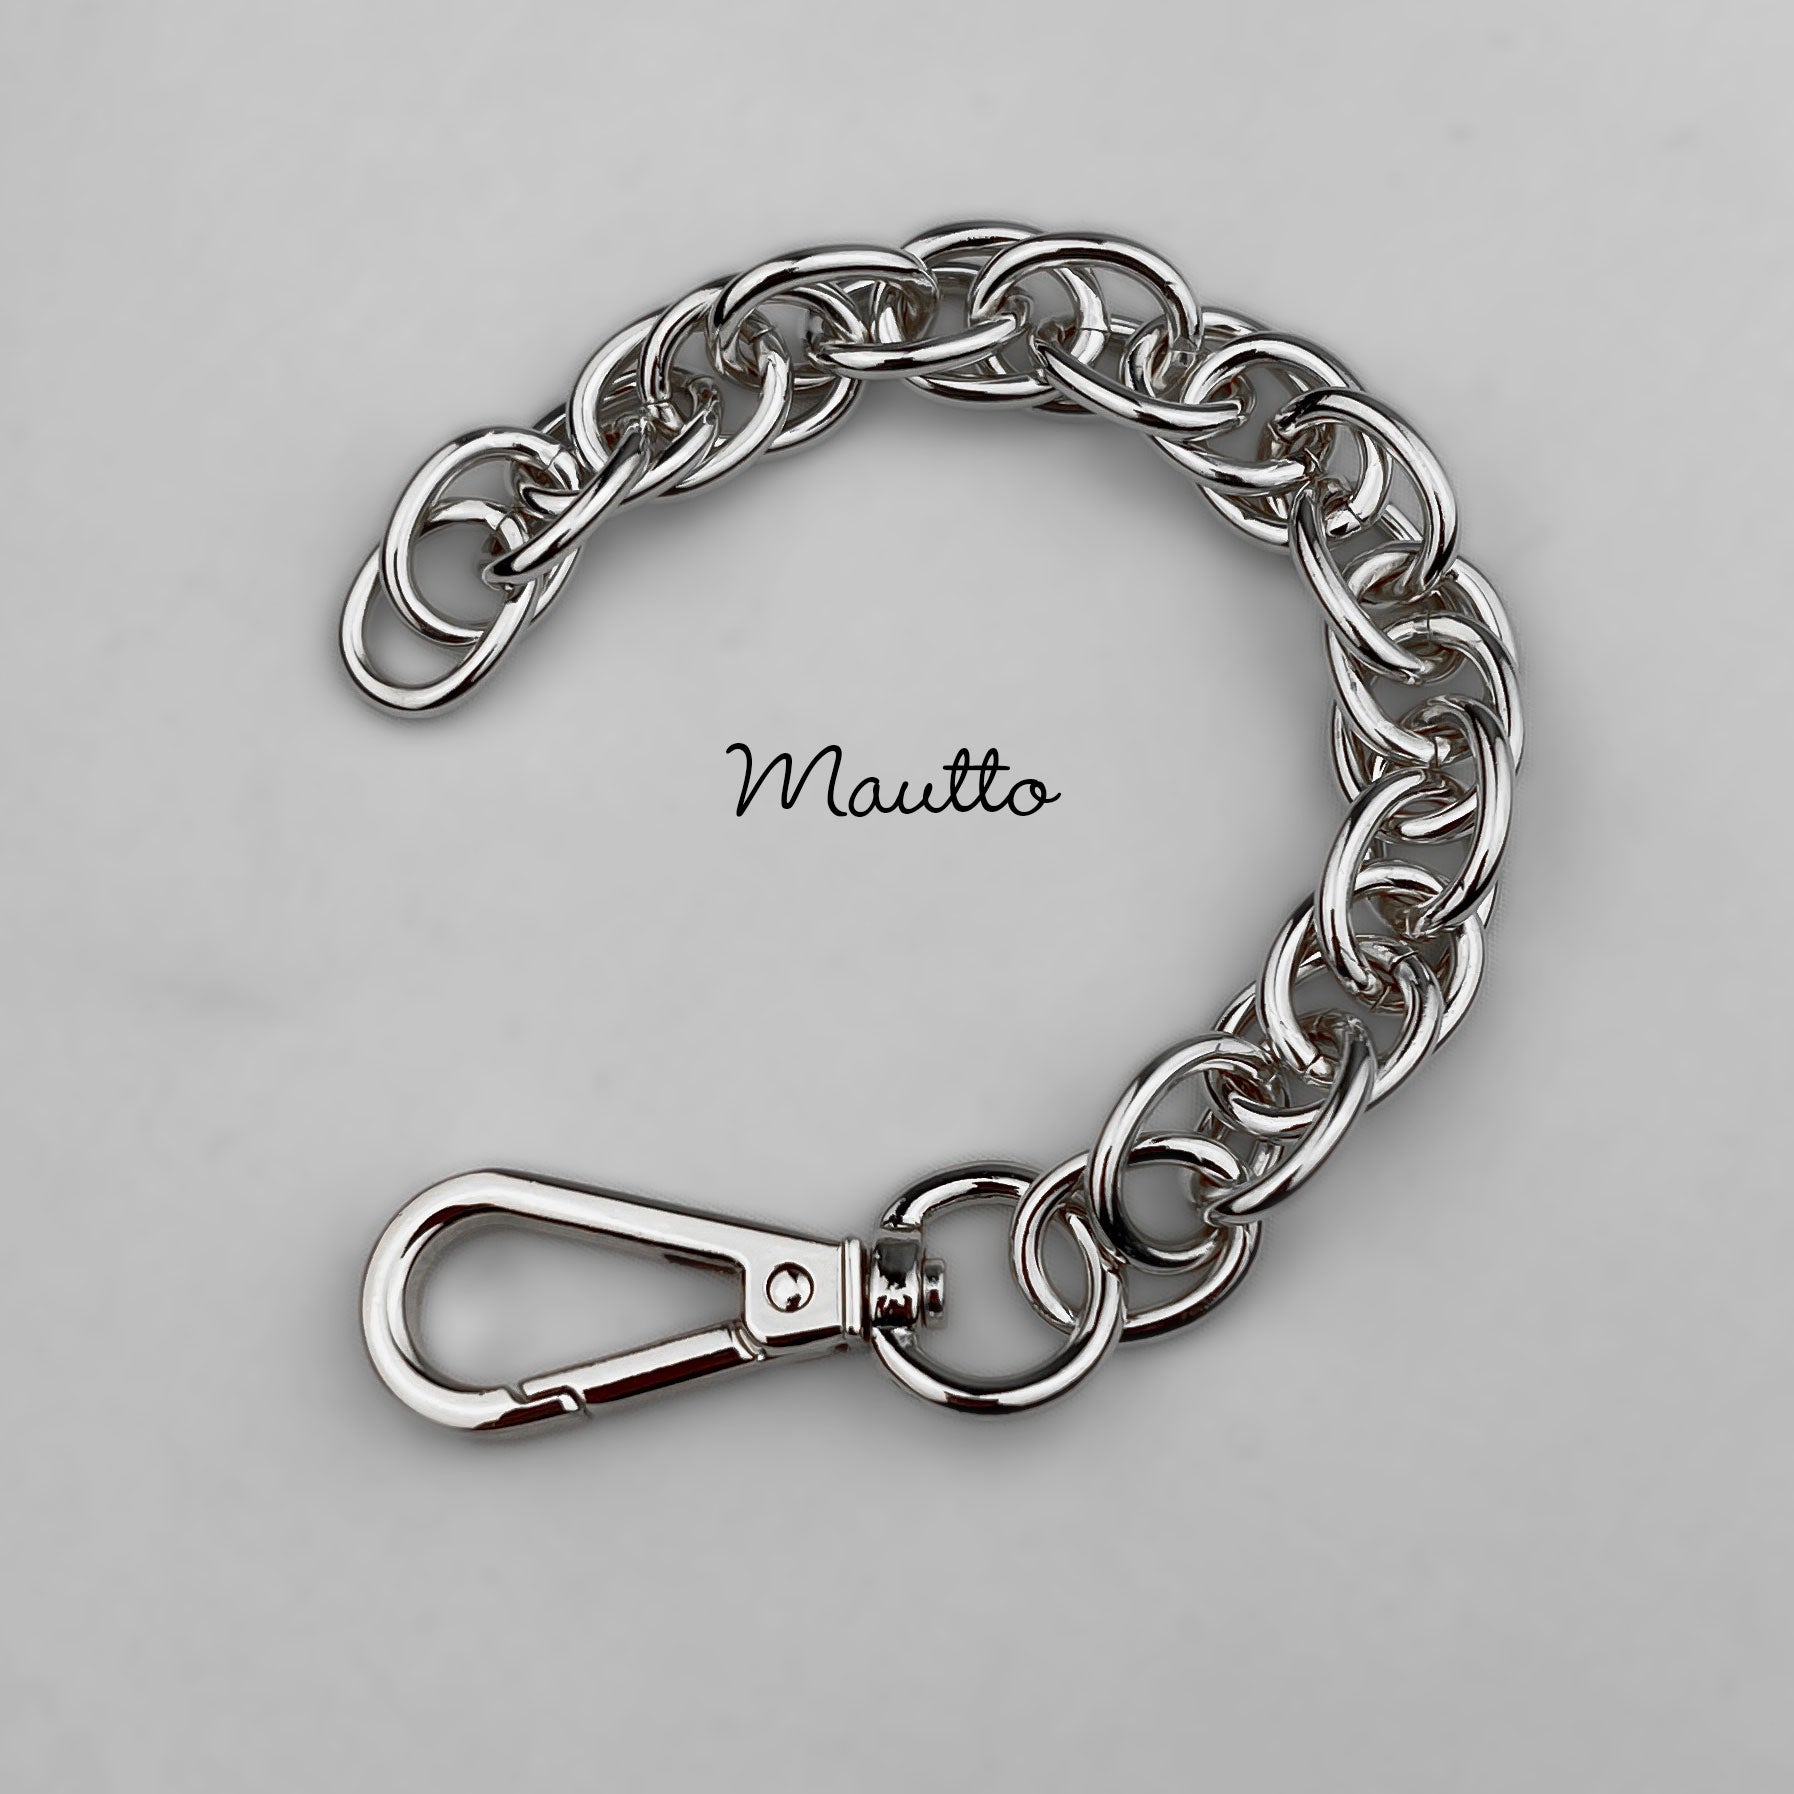 Mautto Wallet Chain / Key Tether